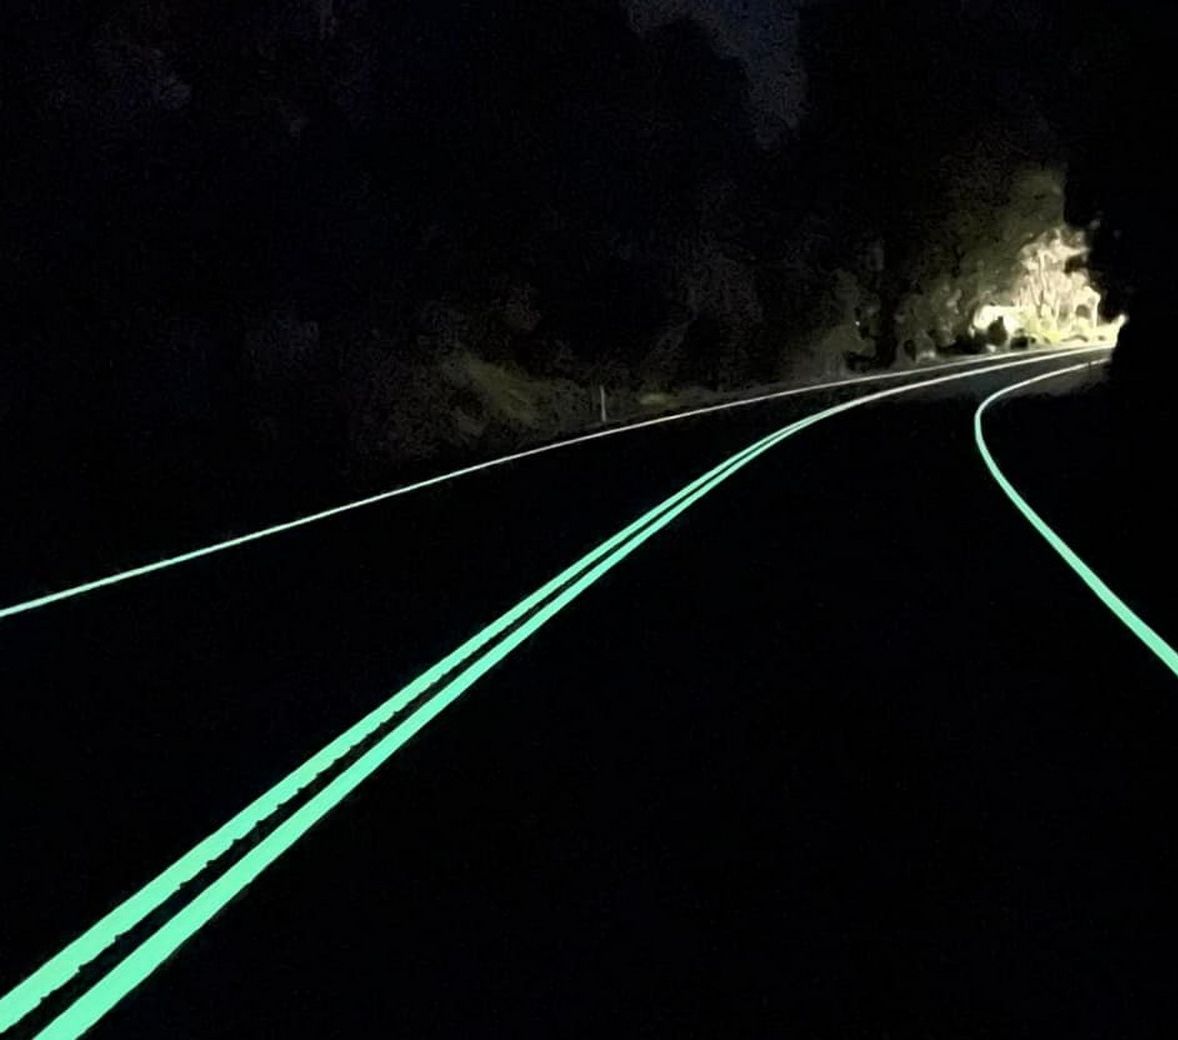 Australia Test New Glow-In-The-Dark Highway Markings, Make It Safer To Drive At Night